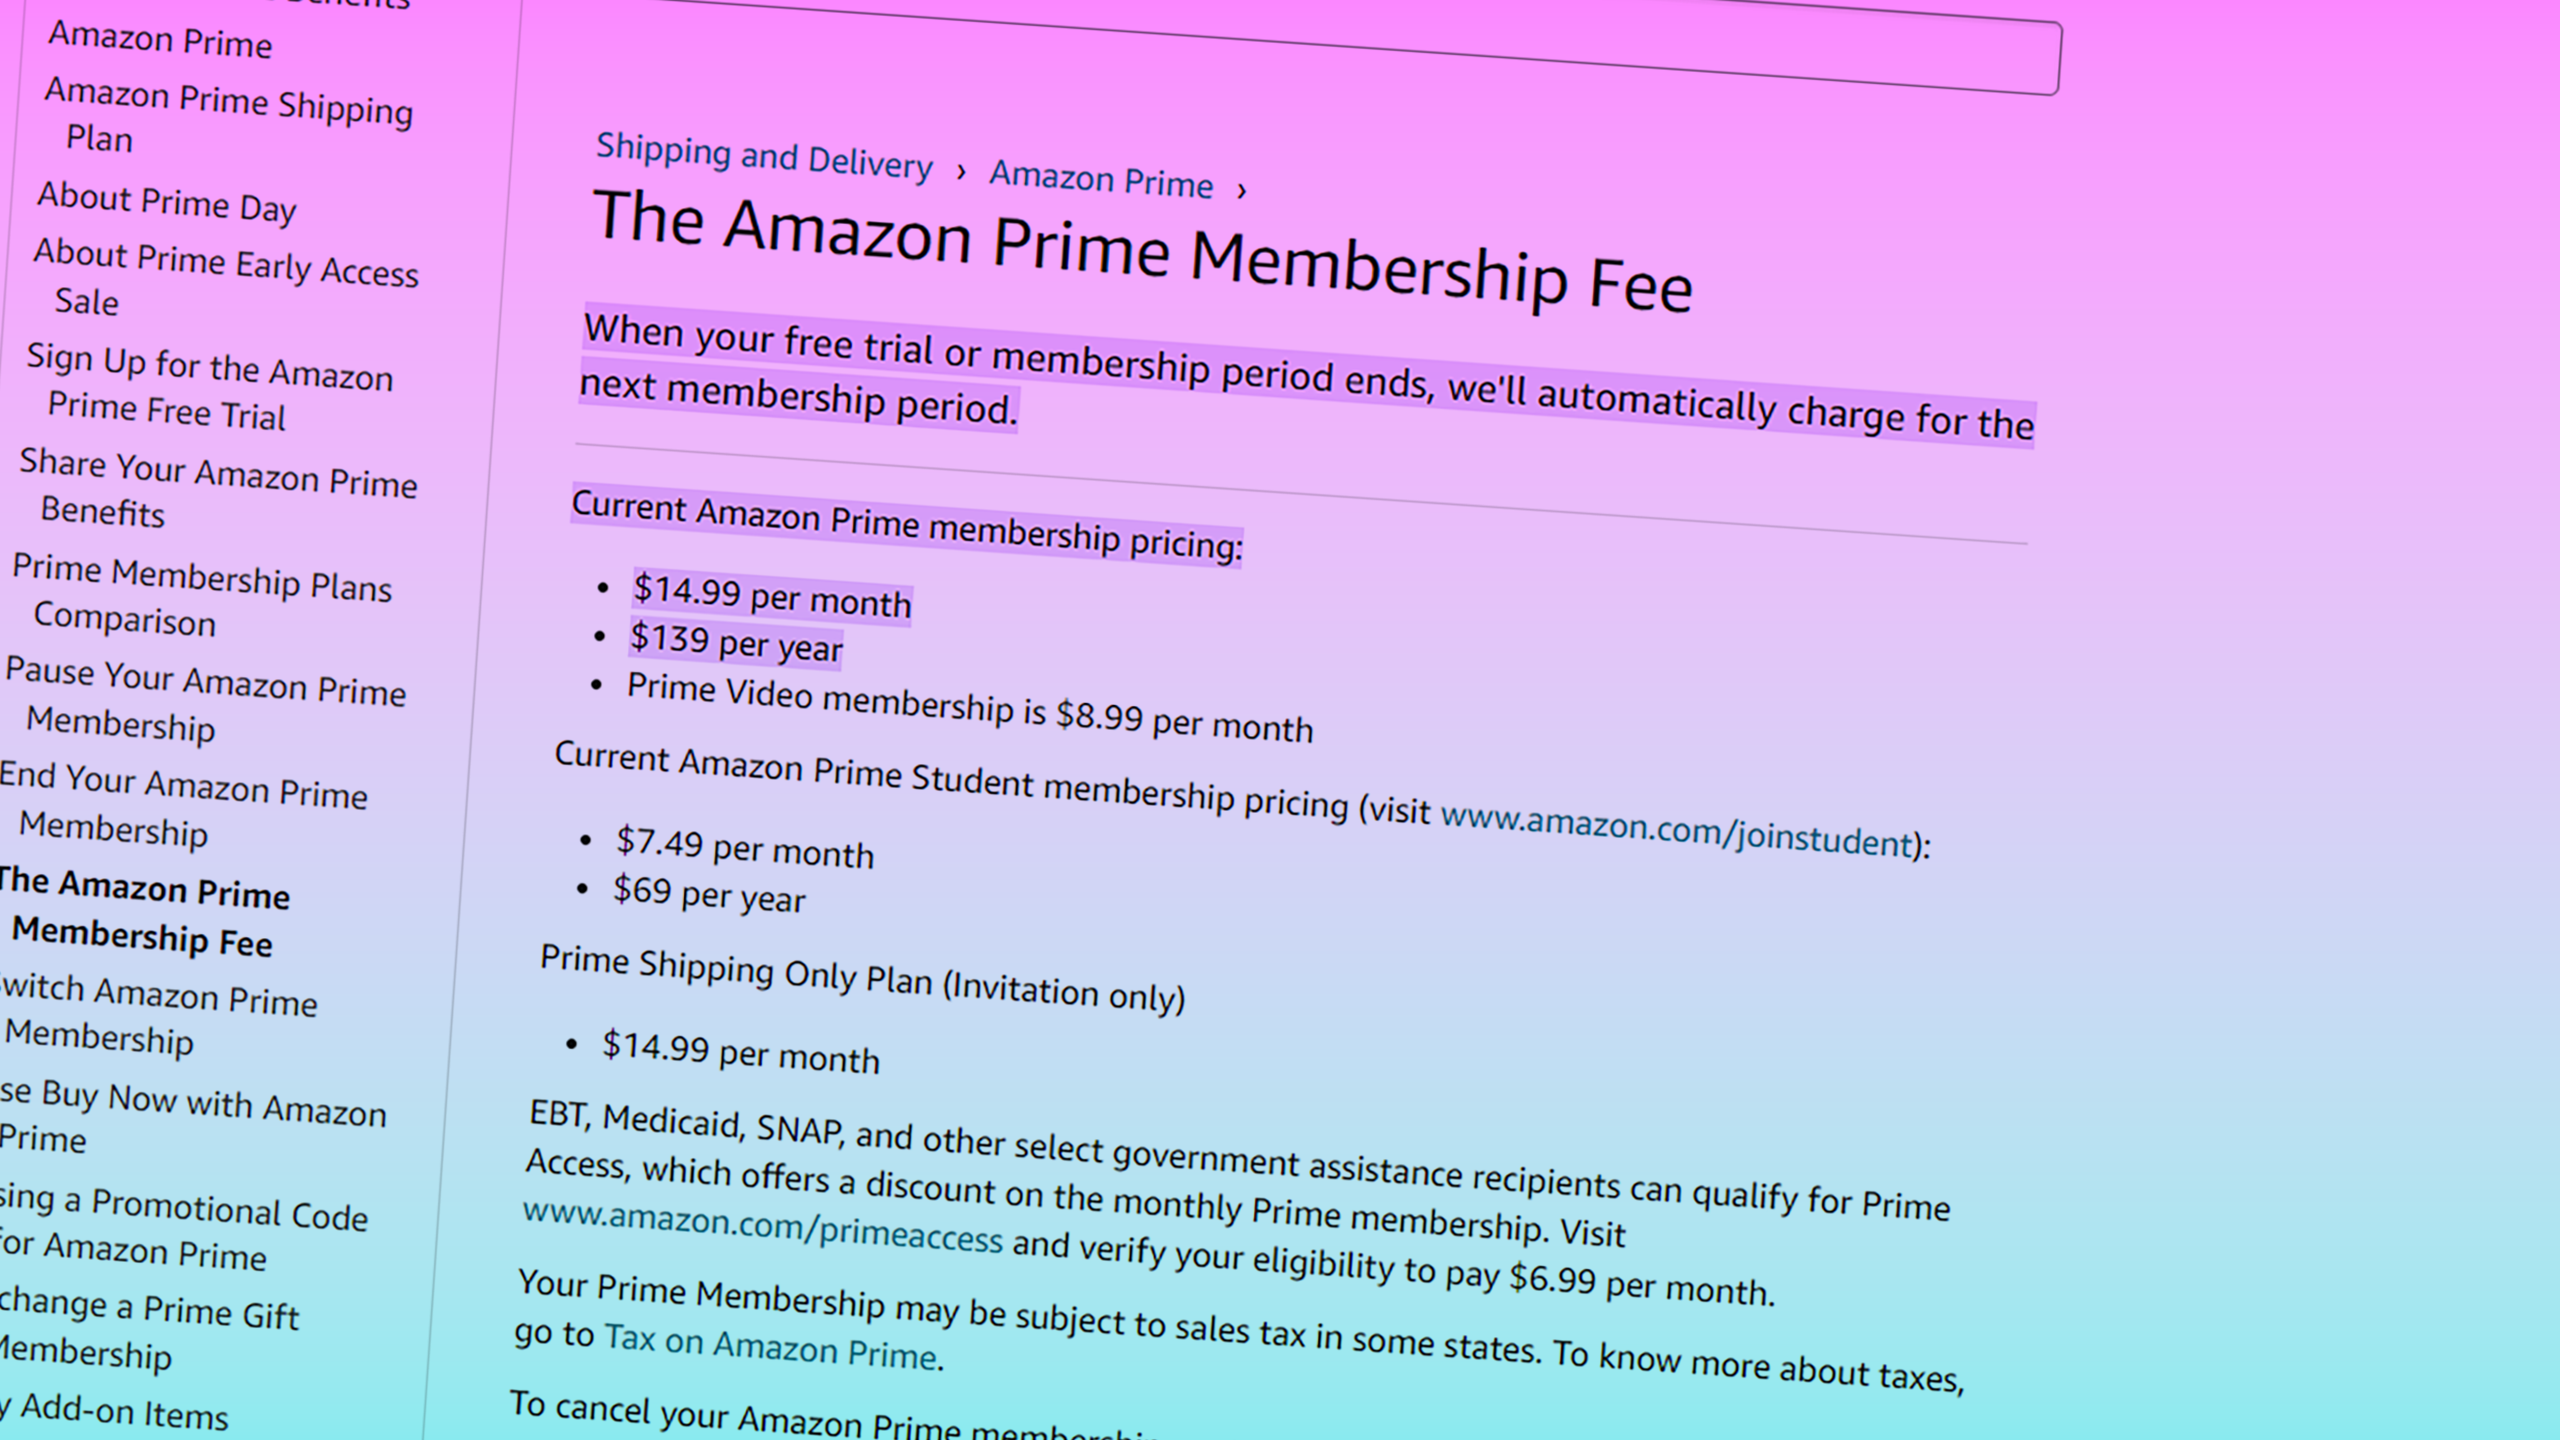 Prime Membership: What Is Included and How Much Does it Cost?